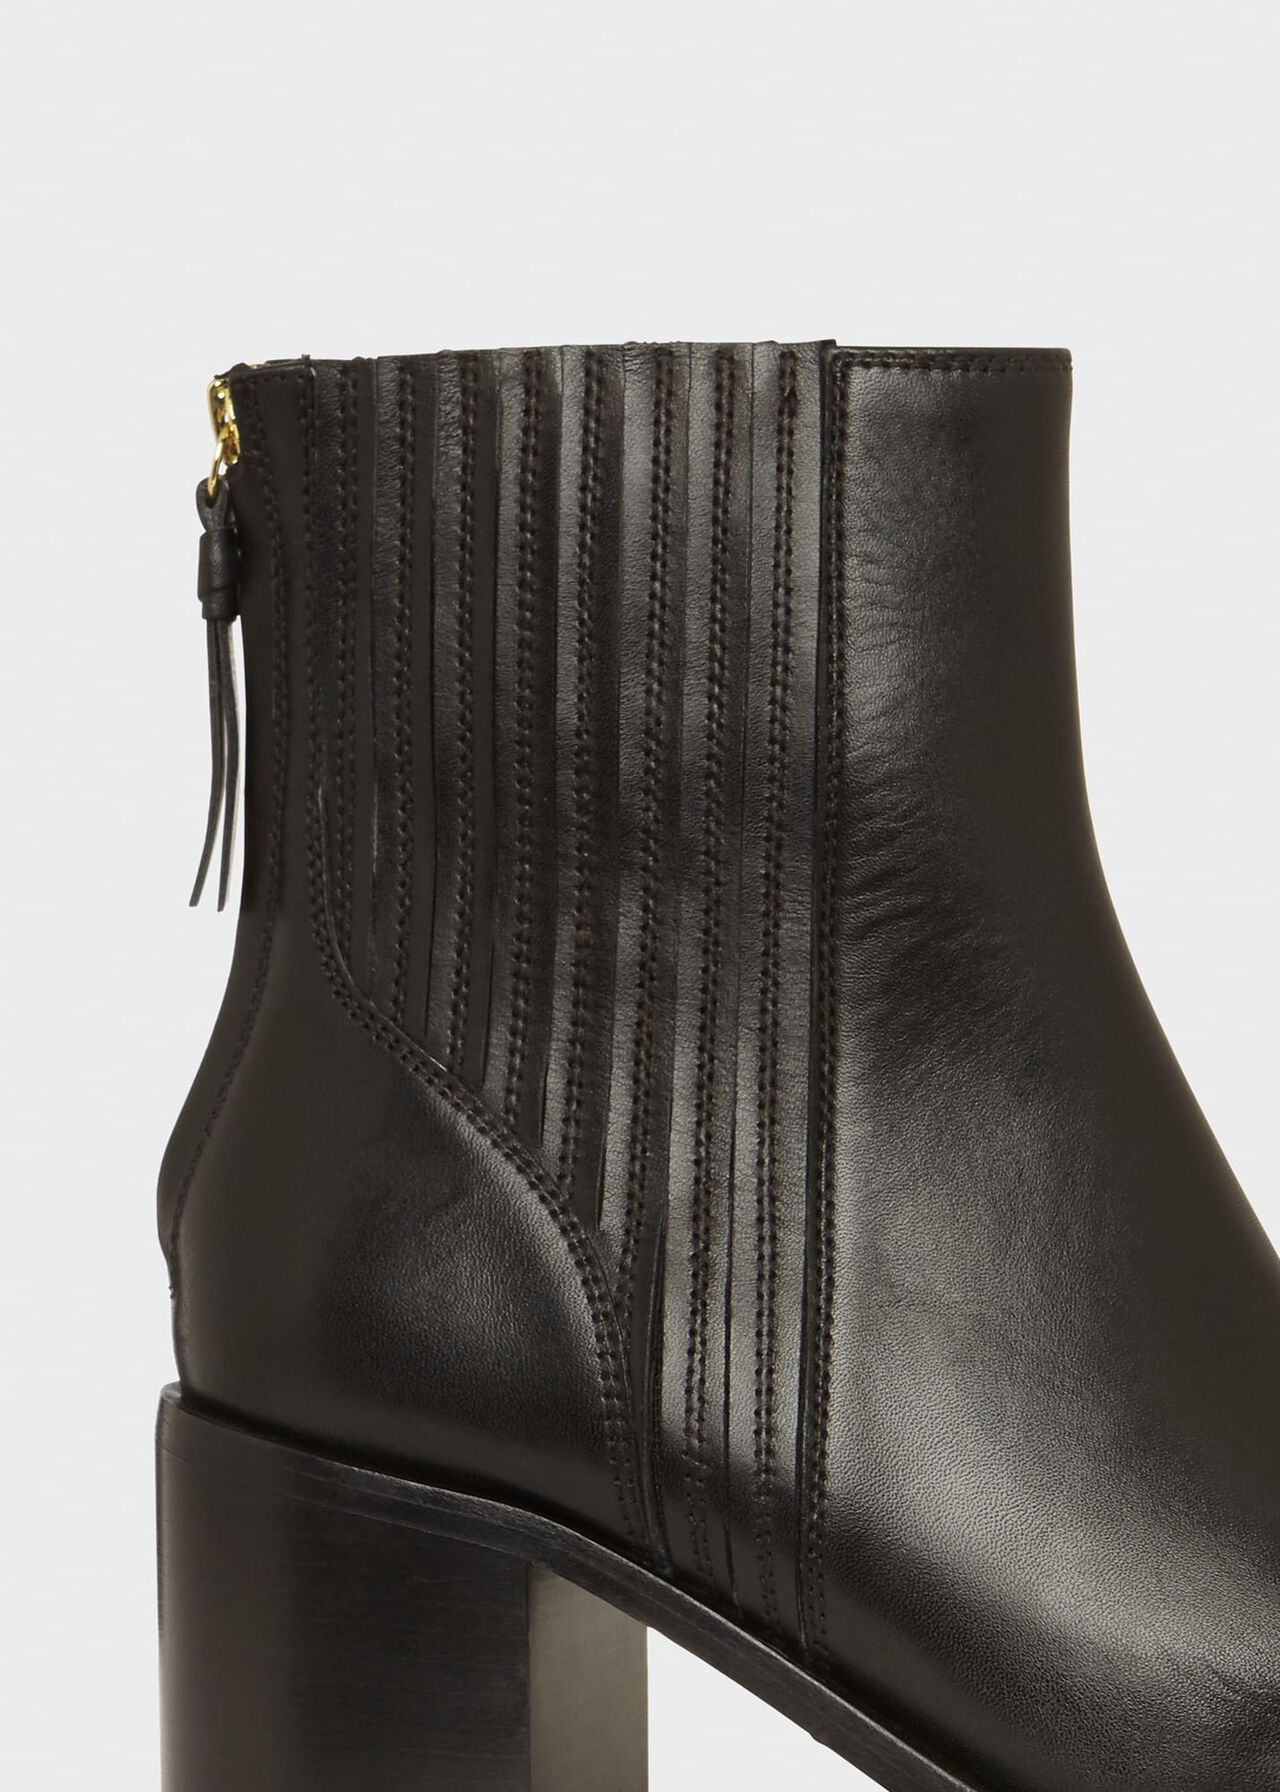 Willa Leather Ankle Boot, Black, hi-res